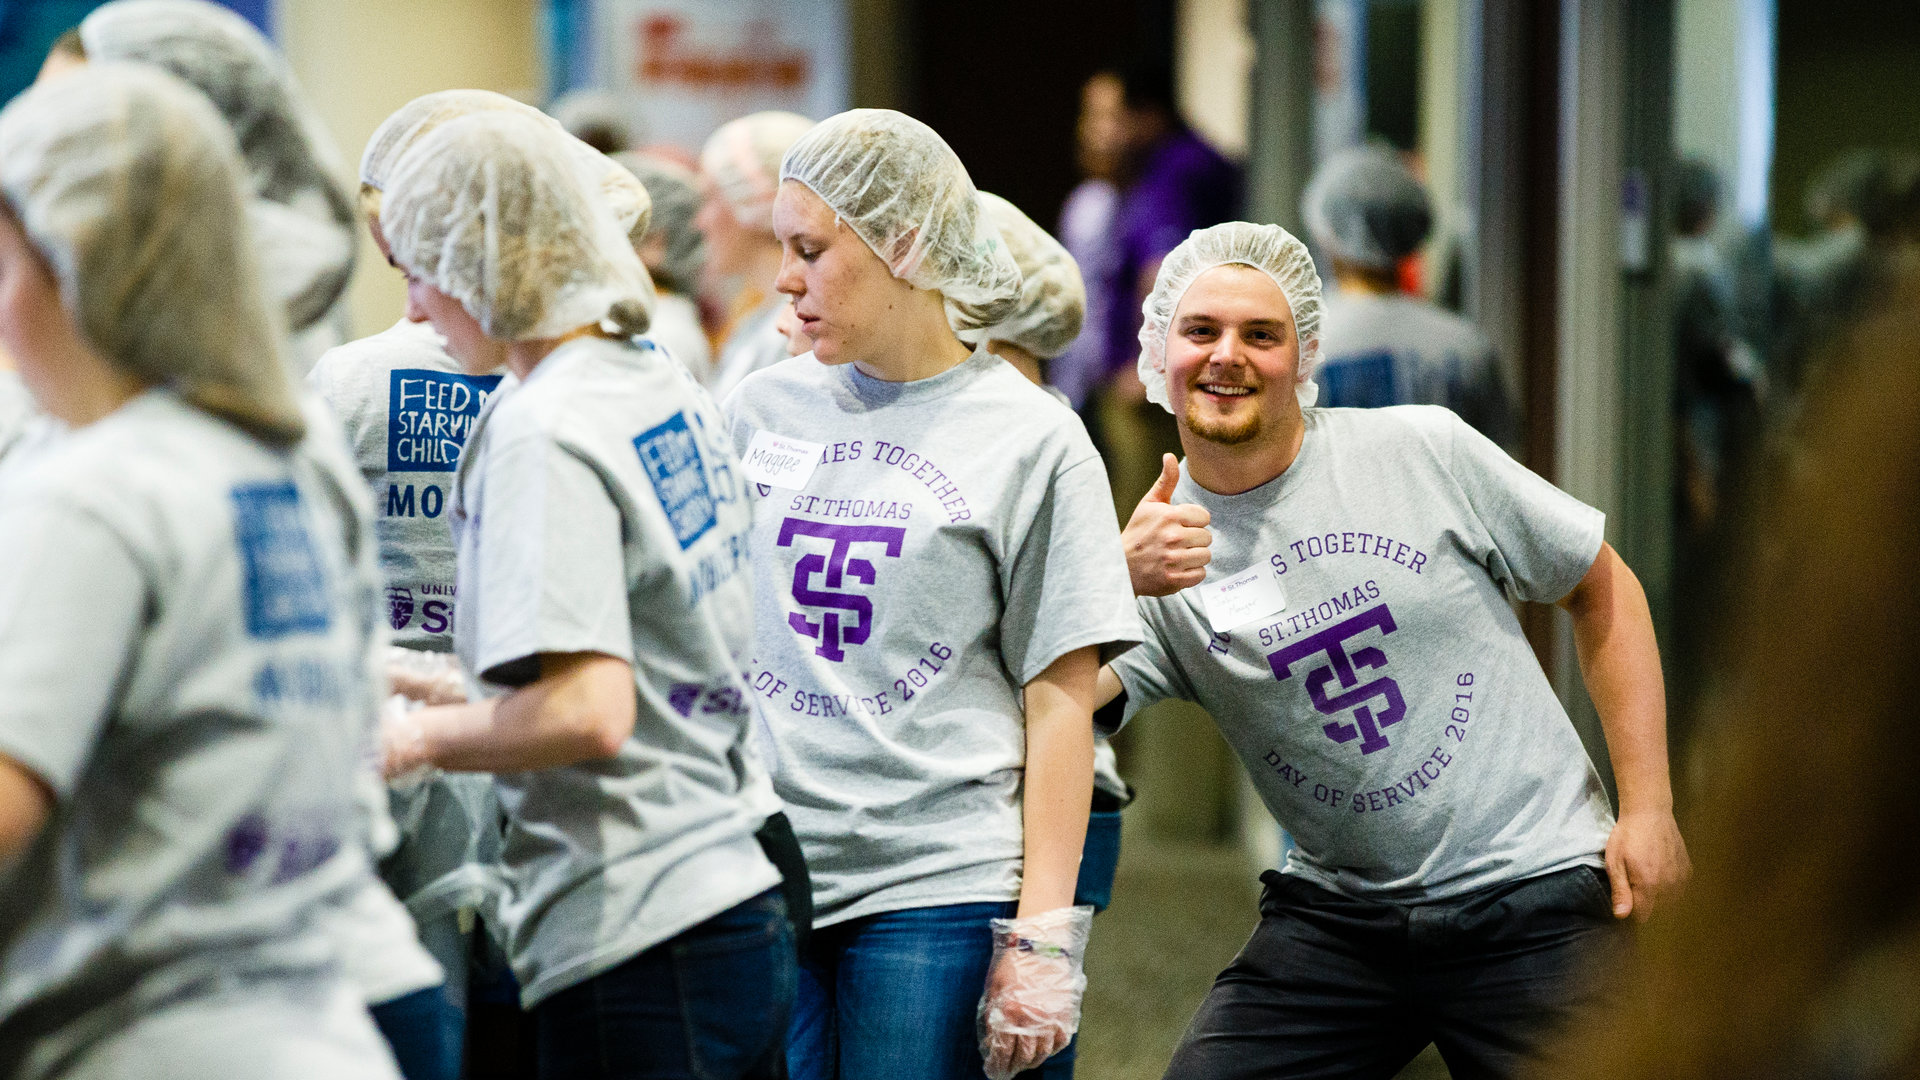 A culture of service starts with the students (shown here packing meals for Feed My Starving Children), who then continue to serve as alumni.